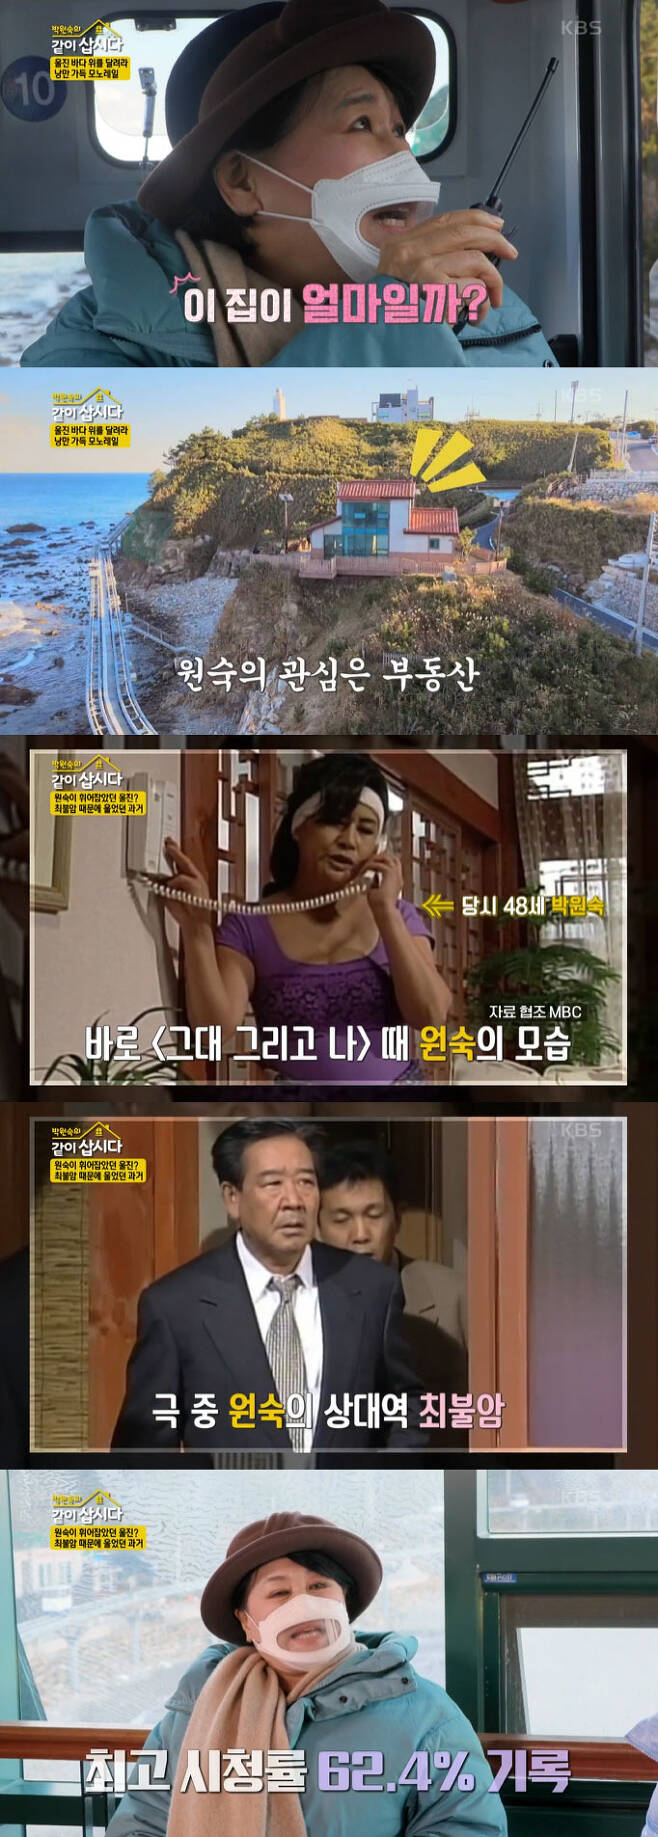 KBS 2TV Lets Live With Park Won-sook Season 3 broadcast on the 19th, the second trip to Uljin prepared by Hye Eun Yi was drawn.While looking at the seas superb view, Park Won-sook found a house on a cliff and wondered about the price.Park Won-sook said: The house built on the cliff is so pretty.How much is this? When the asages showed interest in the real estate, they laughed, Are you looking at the price of the house again? , Lets go to find out the price of the house. A sage that went to the cliff house together as Park Won-sook wished. Is there a person living?I was surprised to find a set sign of the drama Into the Storm.Park Won-sook said: I used to appear on Into the Storm - I havent been here.I did not shoot here at the time, he said. This house was built for drama shooting 18 years ago. Park Won-sook, who was in a memorable memory while looking around the drama set on the way, attracted attention by confessions about the tears shed because of Choi Bum-am, who played a couple in the past drama.It is also the filming location of the drama You and I as well as Into the Storm.Kim Yeong-Ran showed Park Won-sook some of the You and Me videos that Park Won-sook starred in.In the video, 48-year-old Park Won-sook is seen wearing an aerobic costume.Kim Chung recalled, This scene is Memory; it was a very unconventional scene at the time in 1997, recalls Park Won-sook, Ive been loved a lot for drama.Thats when the ratings were good: 62.4 percent, he said.About the popularity at the time, Park Won-sook boasted, When I went into the airport toilet and came out, the door didnt open; people crowded in... and it was real.Choi Bul-am and rumors, who were the opponents of the hot popularity, also spread.Kim Yeong-Ran said: I heard this rumor.Park Won-sook said, I was crying a lot. Park Won-sook said, Will you go to Lee Kyung Jin, the home of Choi Bum-am in the drama?I voted for ARS to go to me. My father responded that he had to go to his home, so the work was over with Lee Kyung Jin. Kim Chung said: Theres a famous hot spring in Canada, I was really surprised when I went indoors at night, and the mans body came out so naked, so surprised that I was restless.But there was a strange shame on his own. So he went out as if nothing had happened.It was very awkward to be wearing clothes alone when I was naked. Hye Eun Yi said, I went to Nice, France, on a vacation trip when I was in my kids school, and the beach was divided in half, and when I looked to the right, I saw that all of them were naked and tanning.So I asked her, Lets go over there and do it. Its never going to happen in Korea. And she said, Are you really going to do it?So I said, I want to try it. And my daughter said, Ill go over there then. I took off my top and my panties were sitting naked. But who looks at me? I still go deep in the sea and take off all of the Sooyoung there.Sooyoung wears it on his wrist. Sooyoung. Sooyoung comes out wearing Sooyoung suit again.Then I feel so good, confessions said.